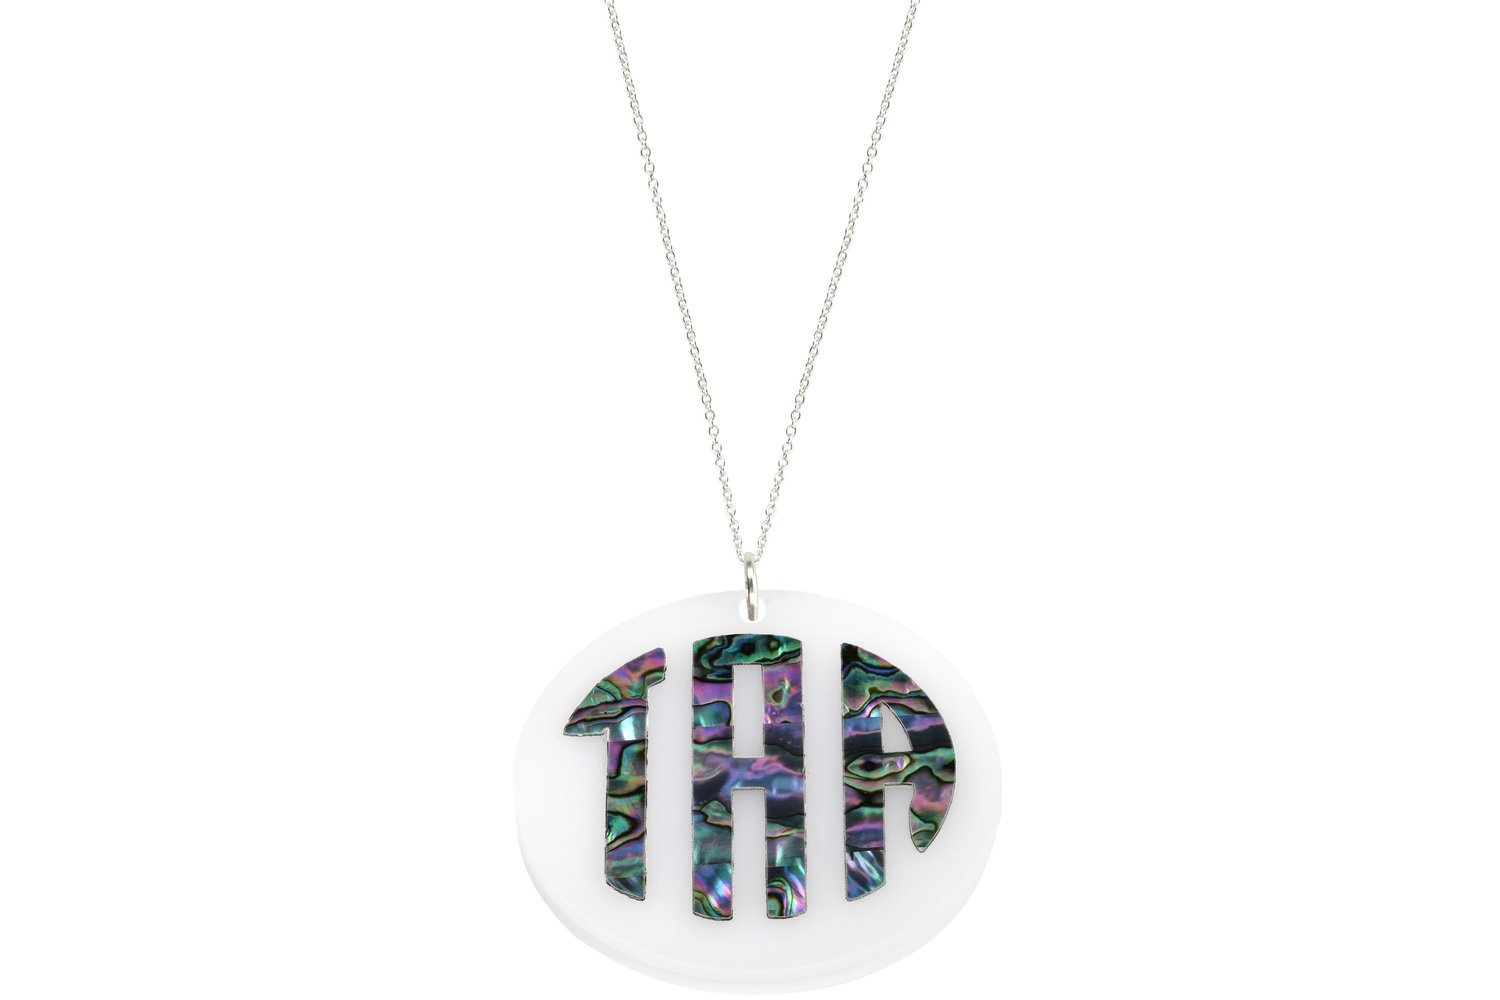 Mother of Pearl Monogram Pendant with Chain Necklace